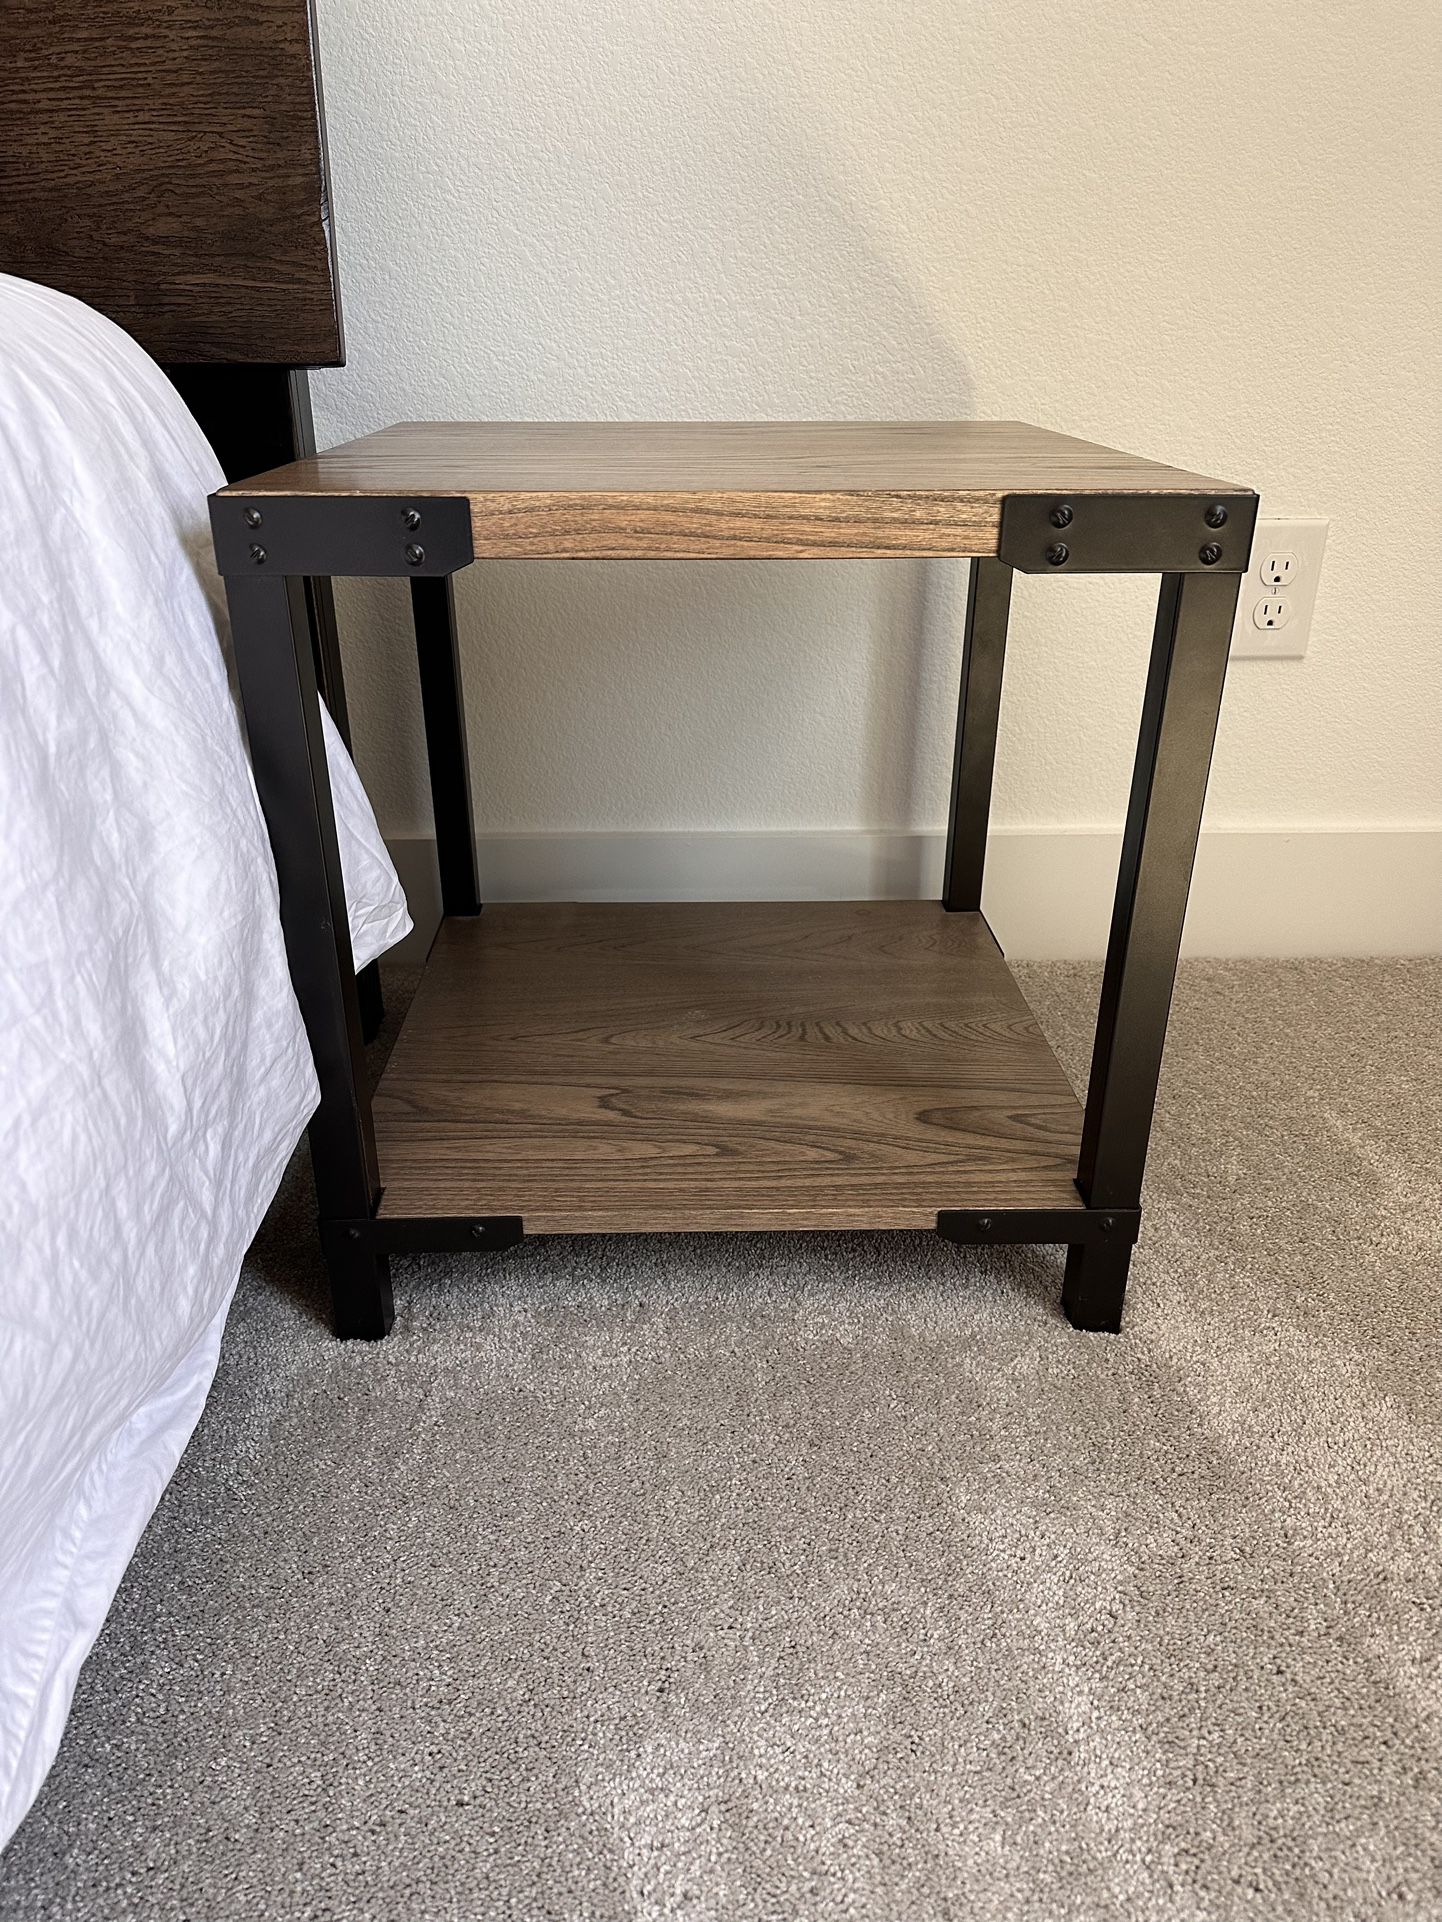 Two Nightstands Or End Tables